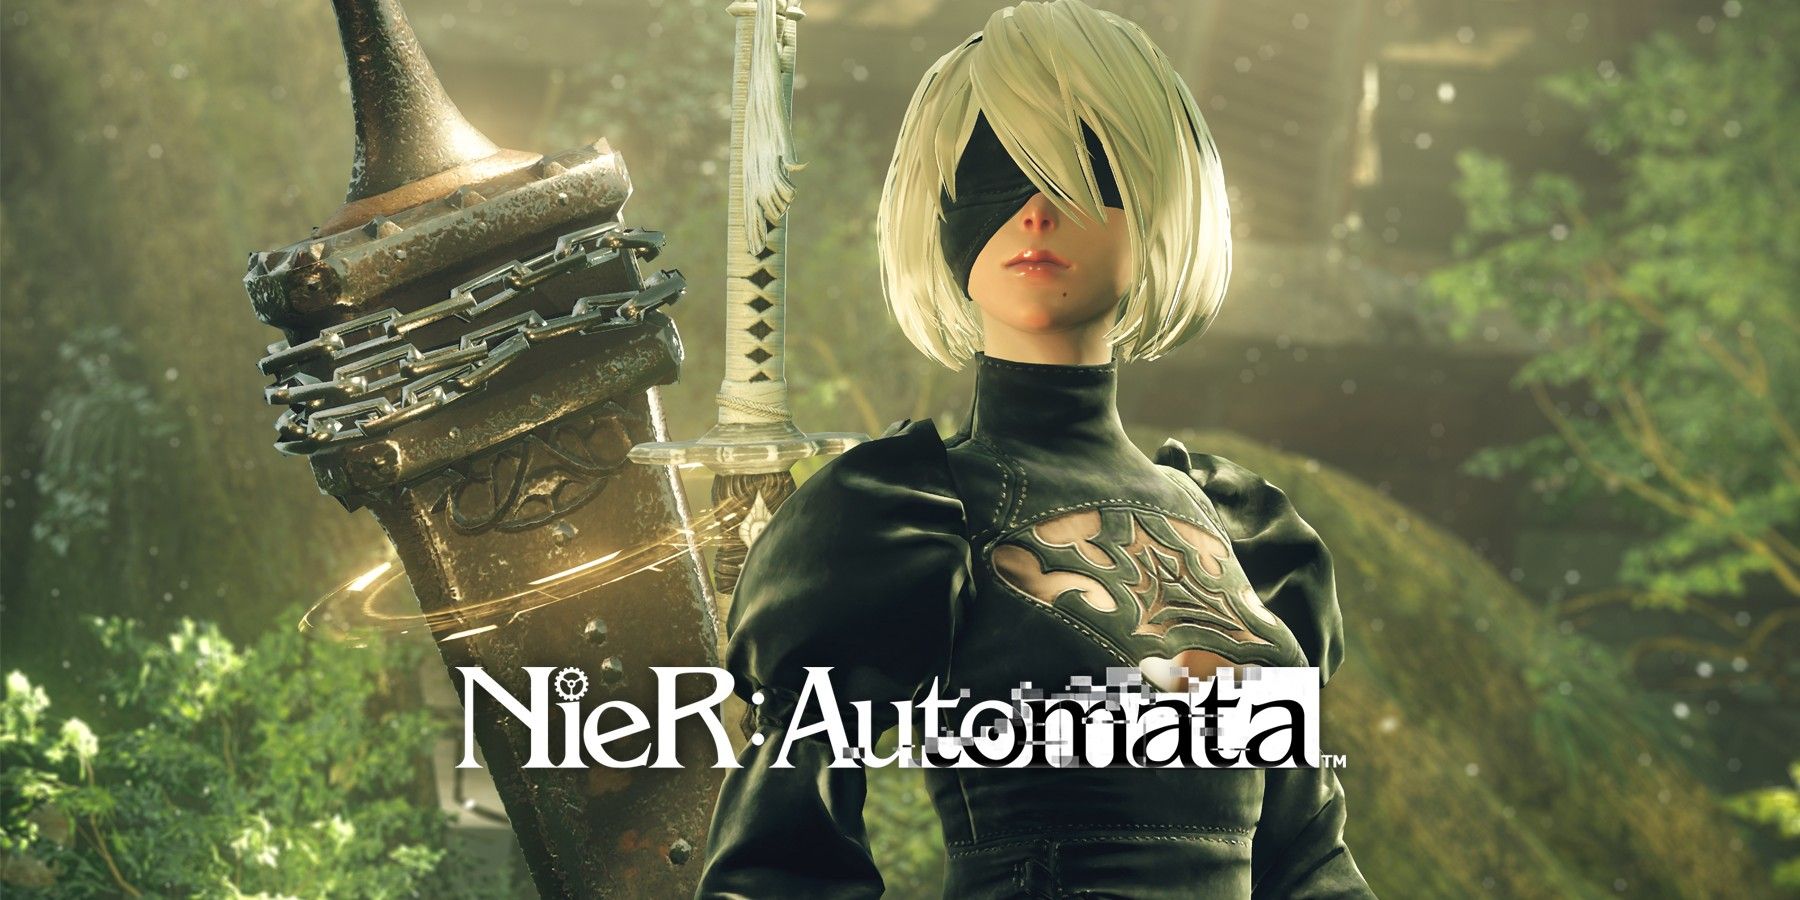 nier automata title card and character